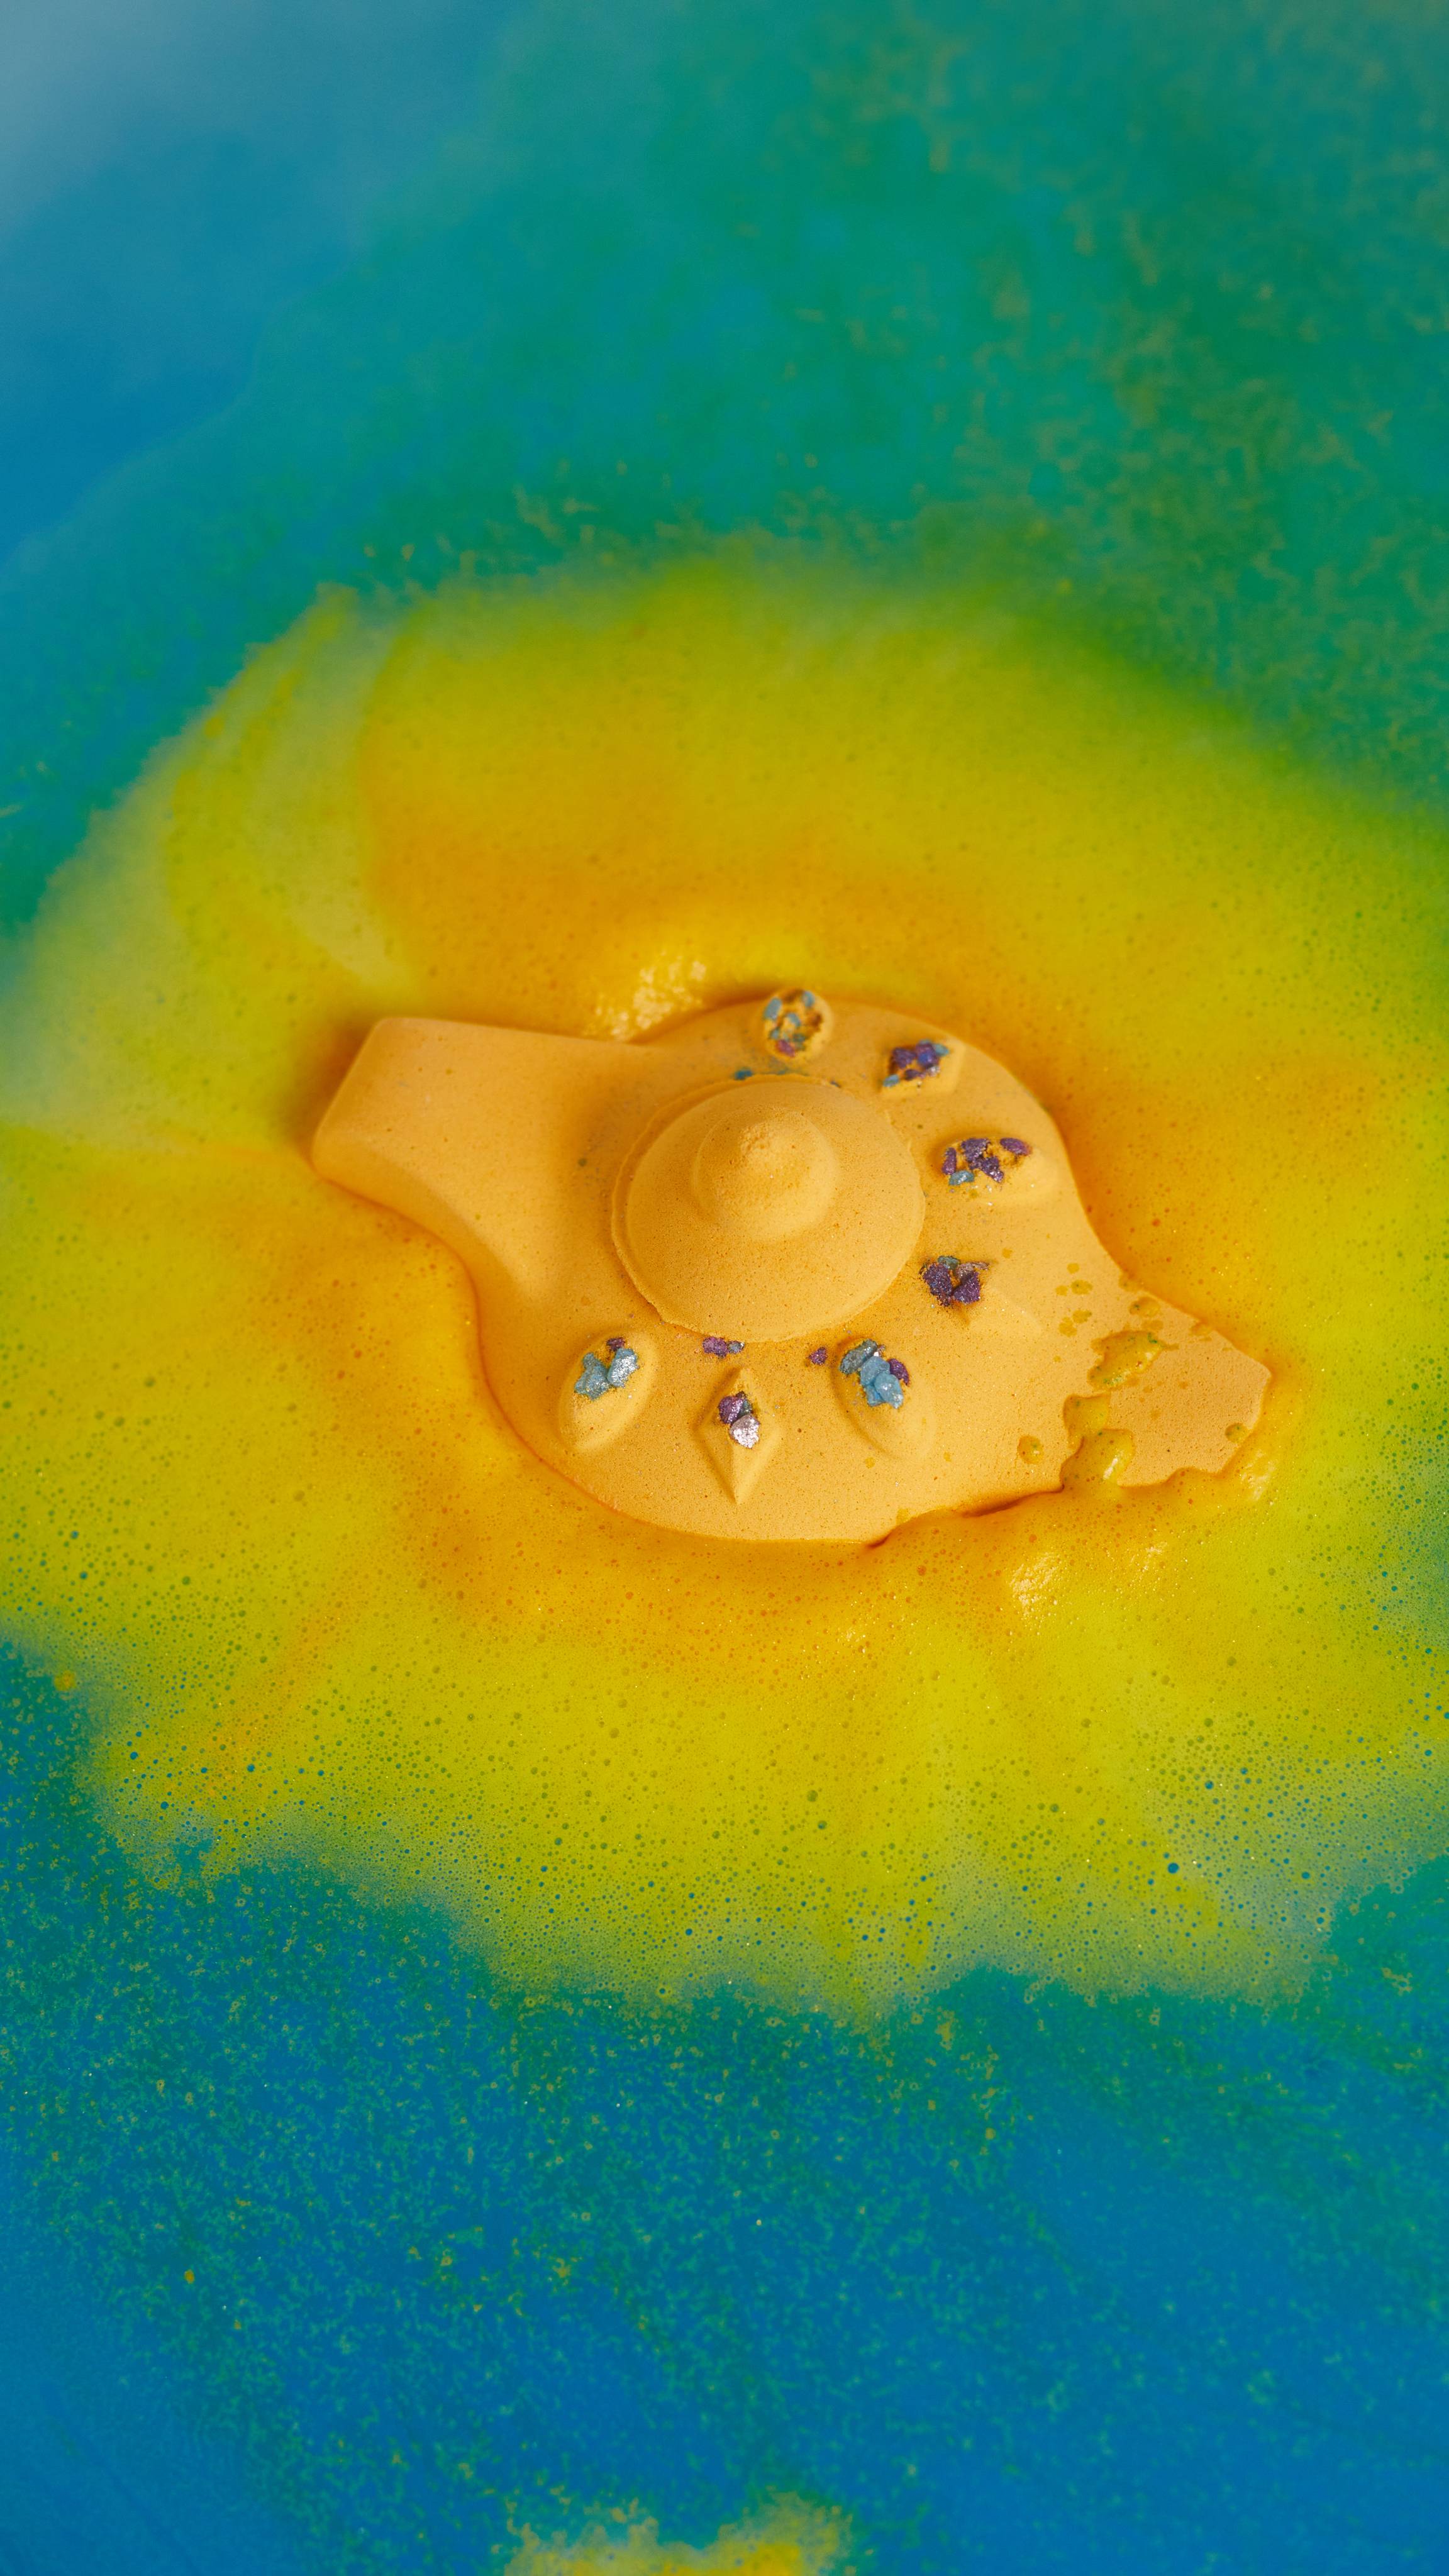 Image shows The Wishing Lamp bath bomb in bath water slowly dispersing its bright yellow outer layer in thick foamy waves.